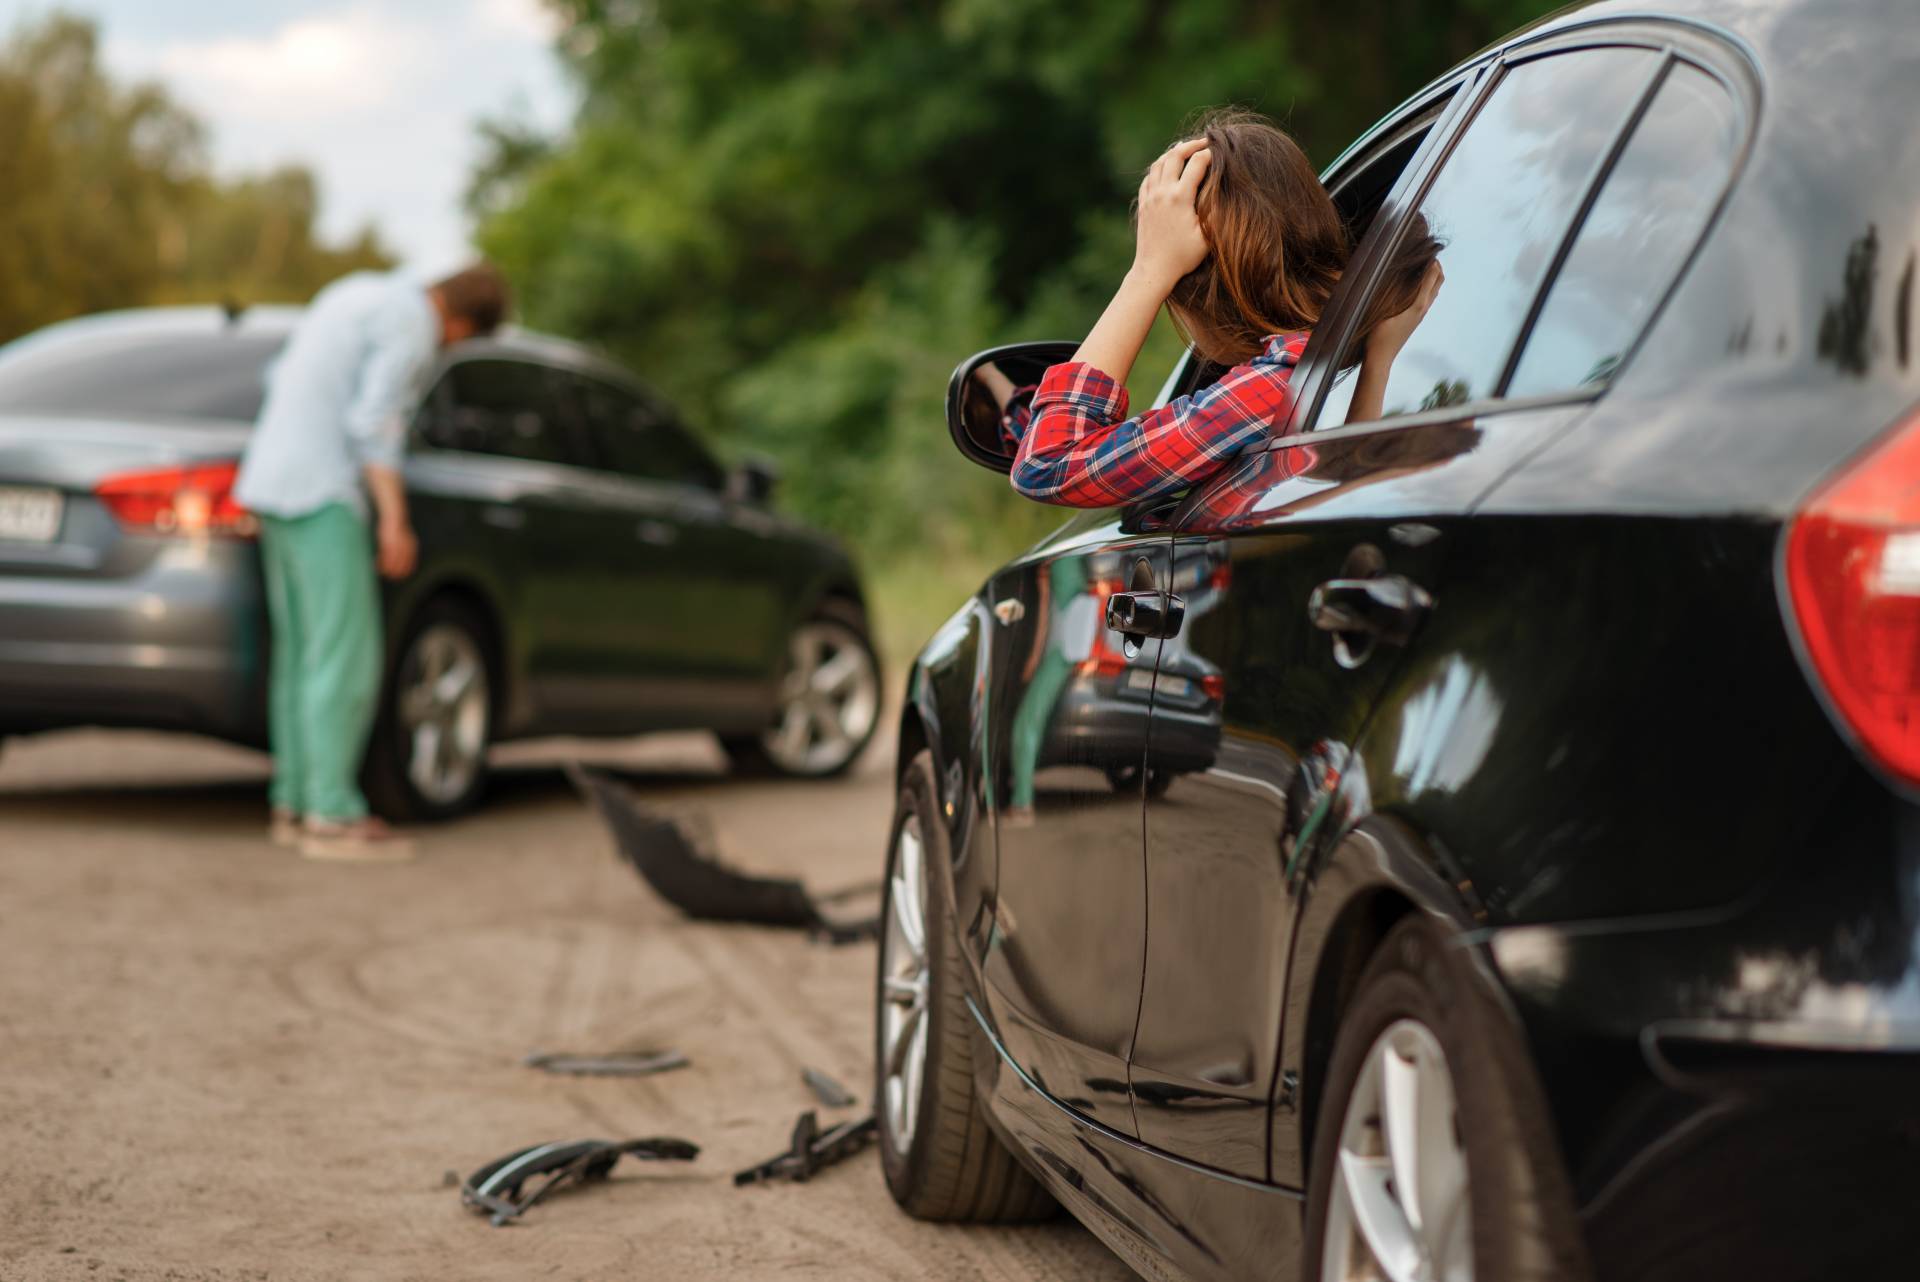 Reasons to get a lawyer after car accident